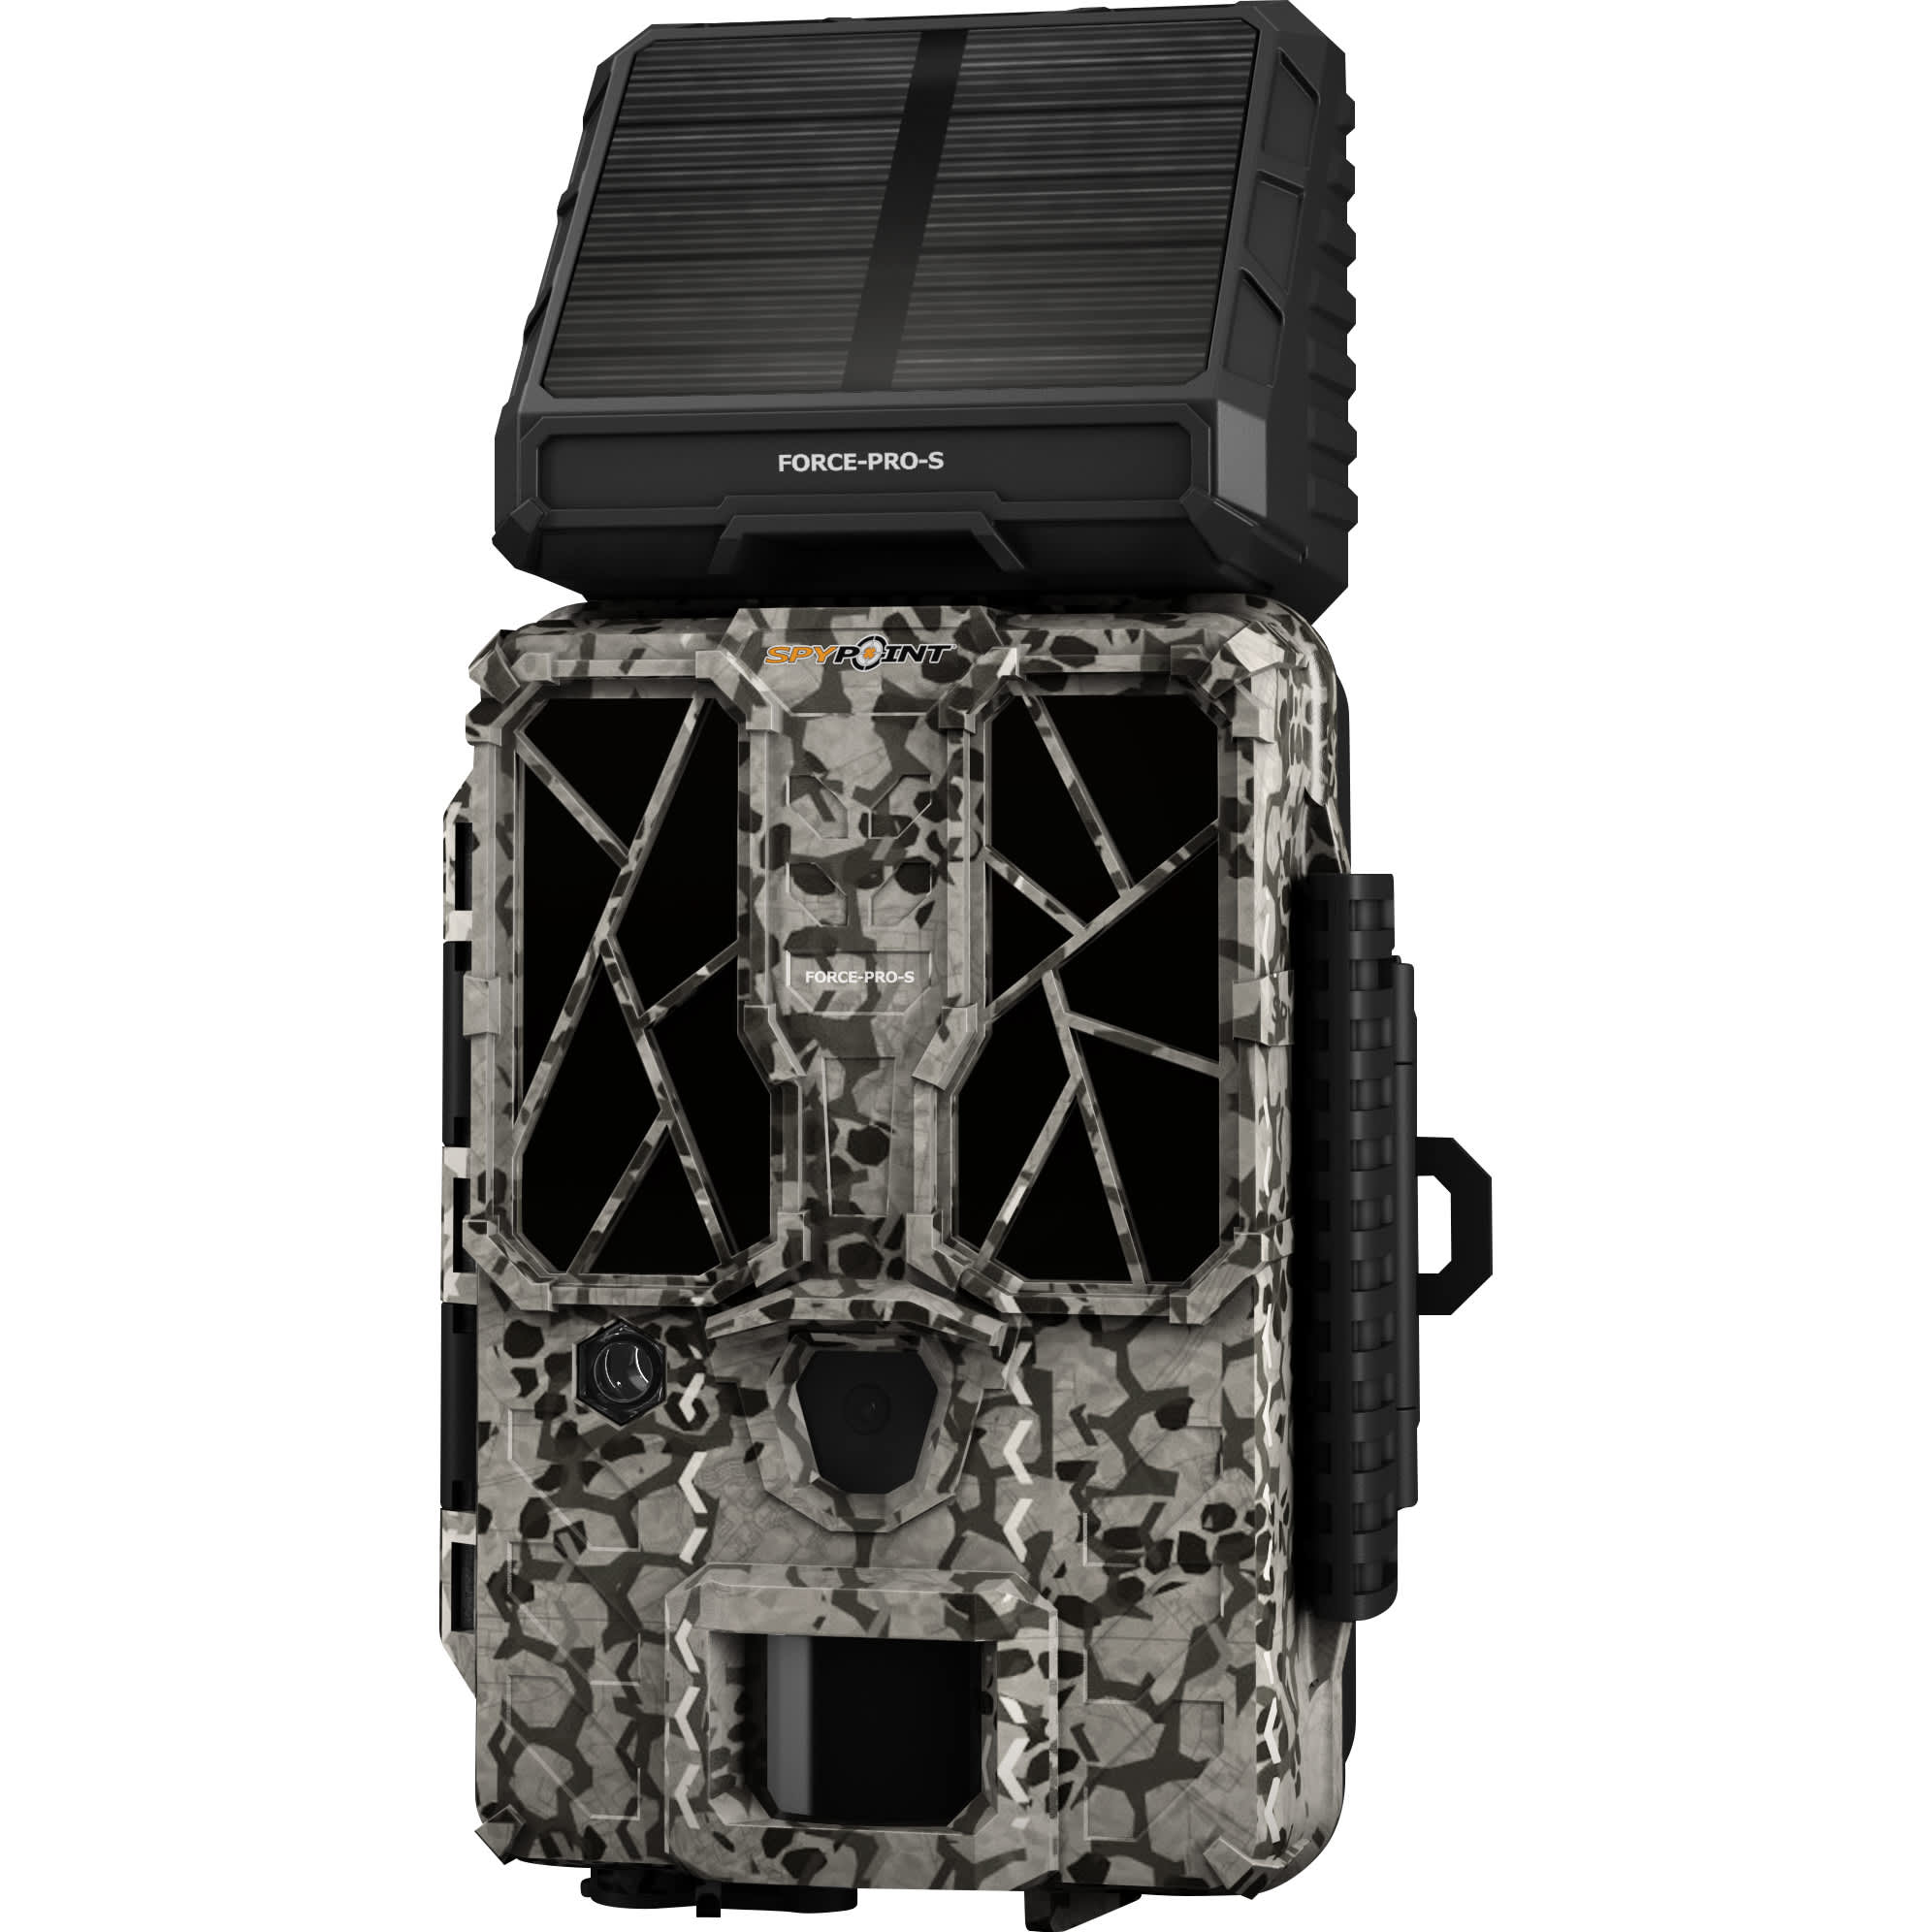 SPYPOINT® FORCE-PRO-S Trail Camera